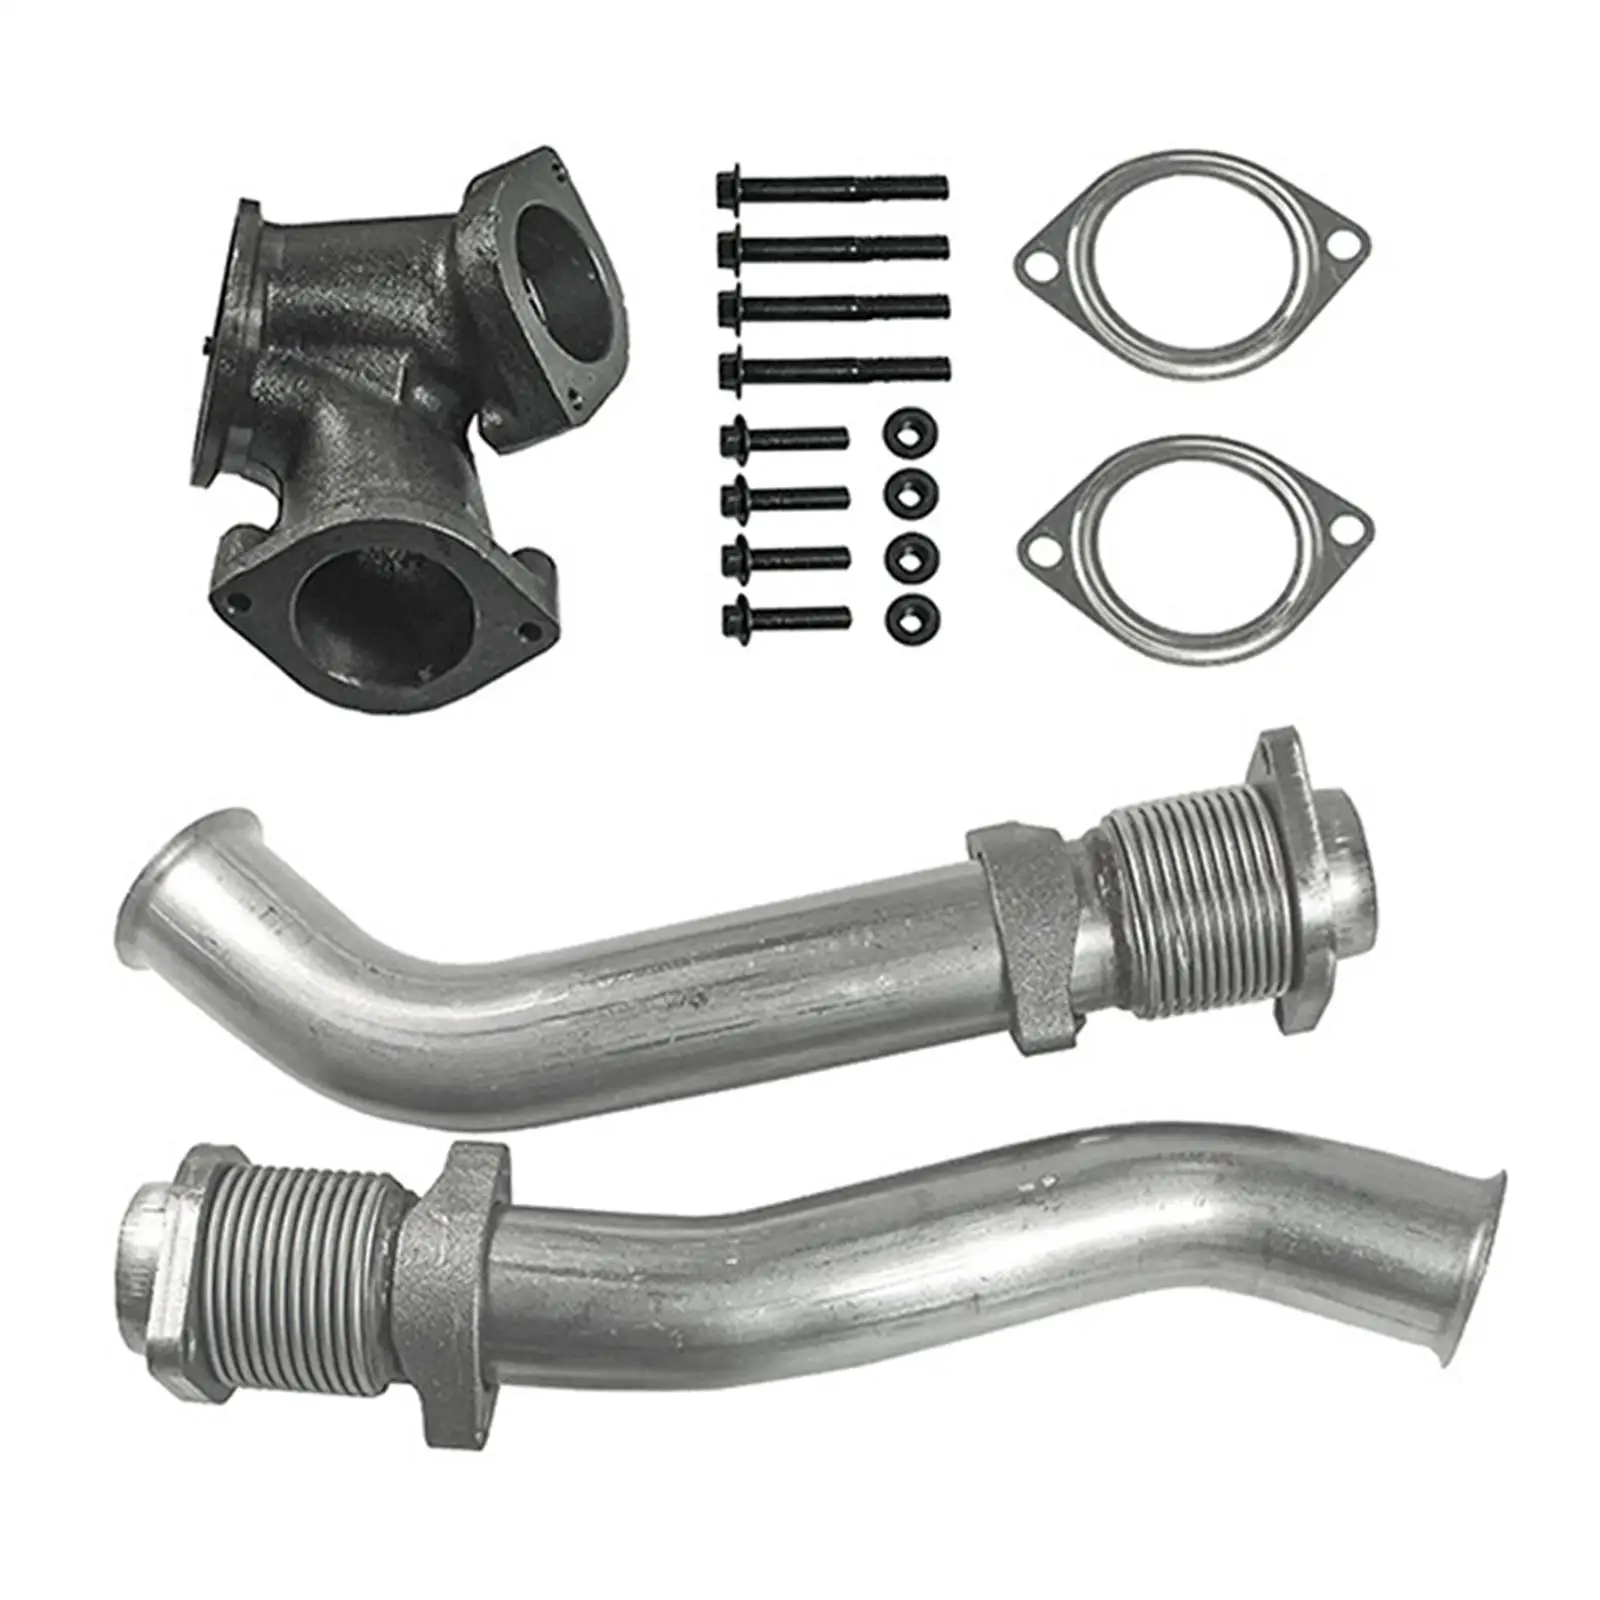 Turbocharger up Pipe Kit 679-005 Engine Parts for Ford F-250 F-550